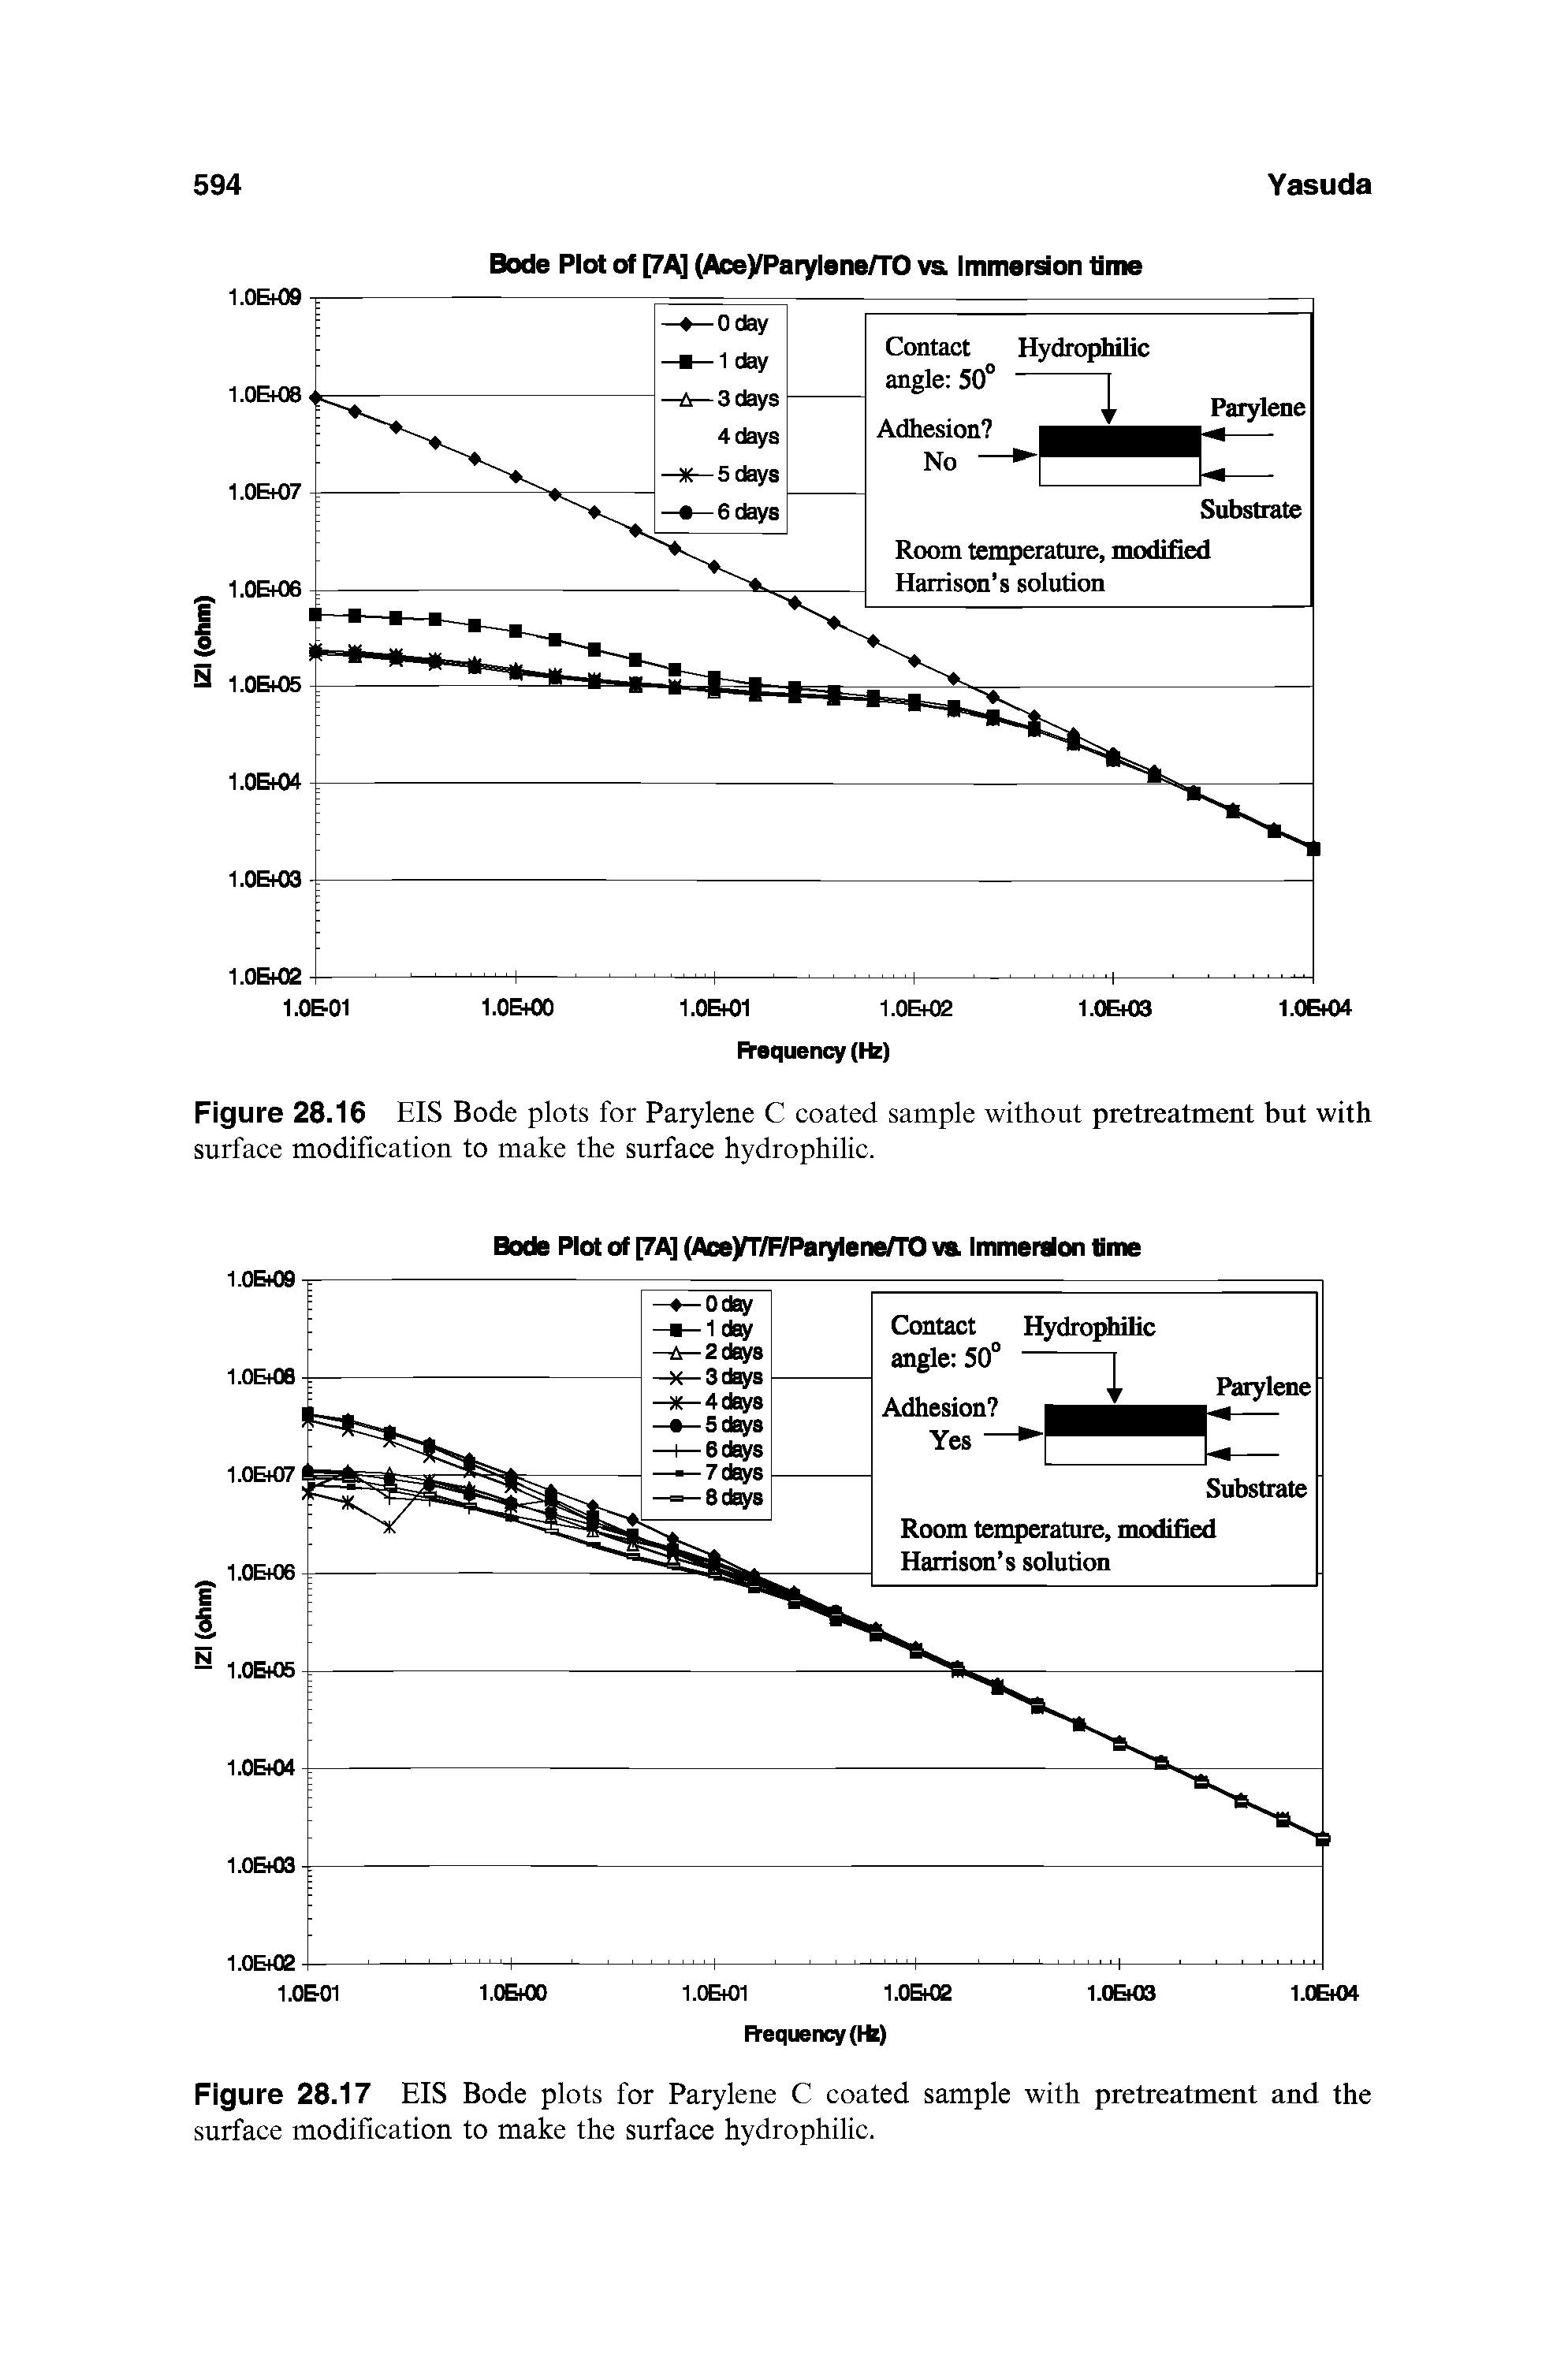 Figure 28.16 EIS Bode plots for Parylene C coated sample without pretreatment but with surface modification to make the surface hydrophilic.